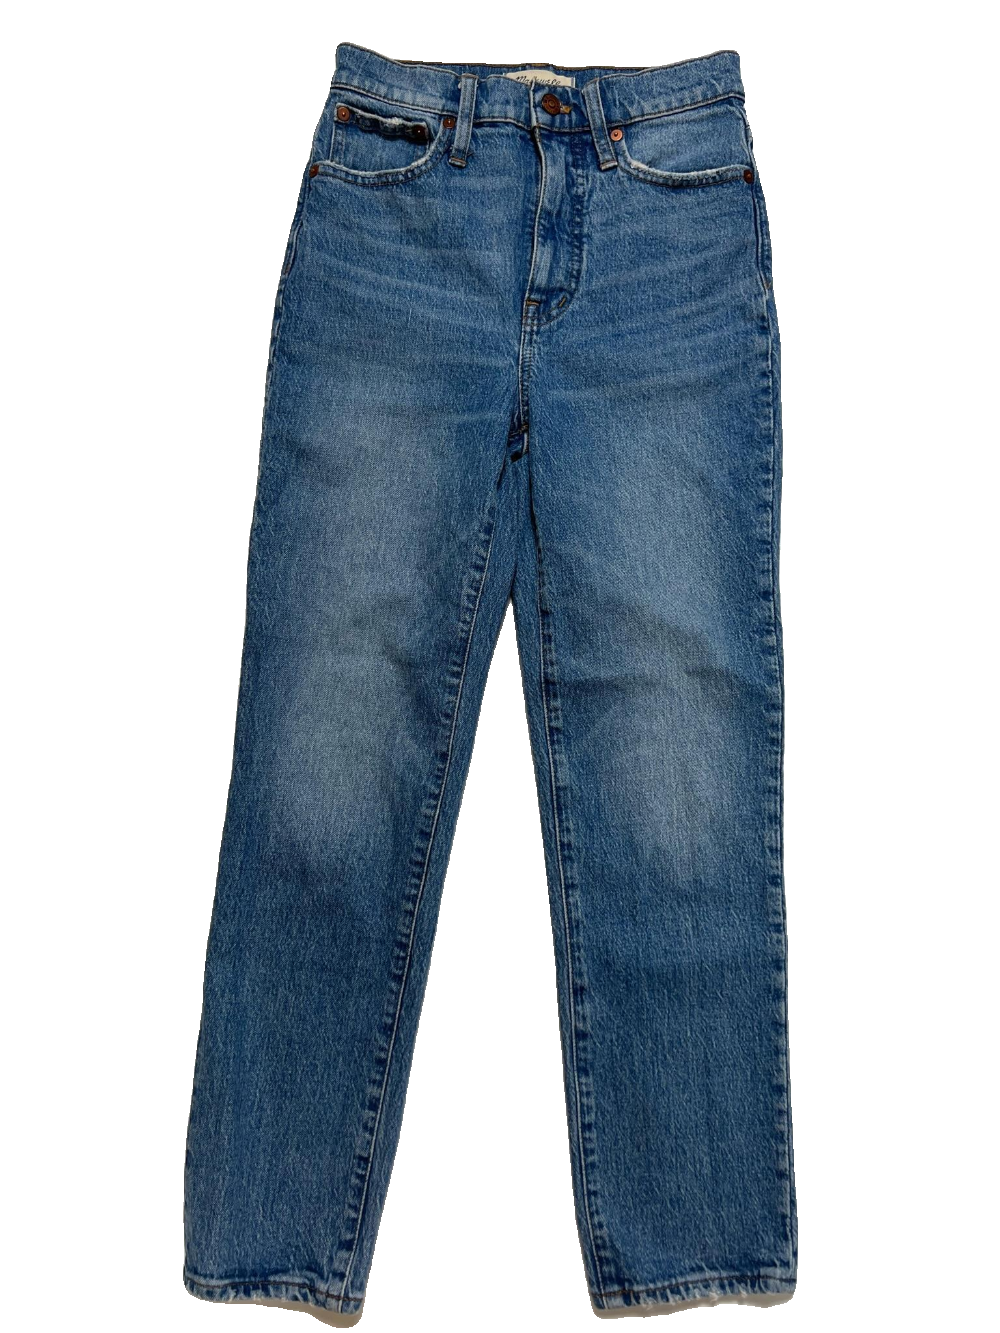 Madewell - Blue Jeans